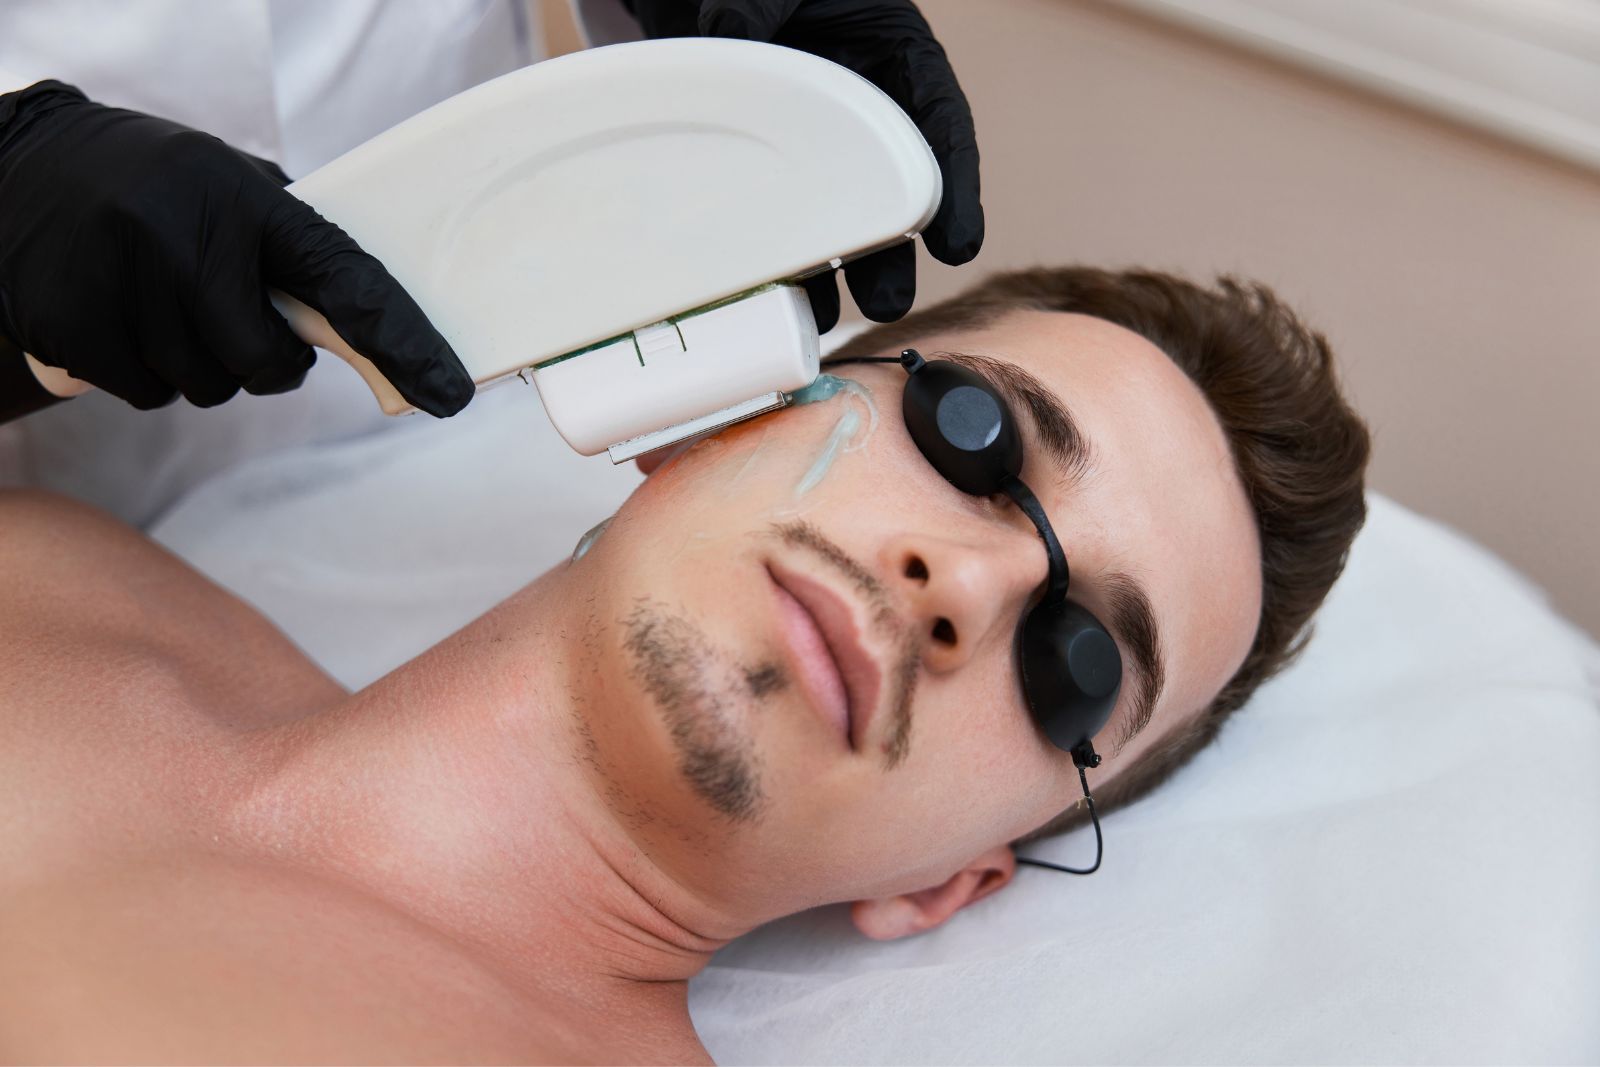 A man is getting a laser treatment on his face.